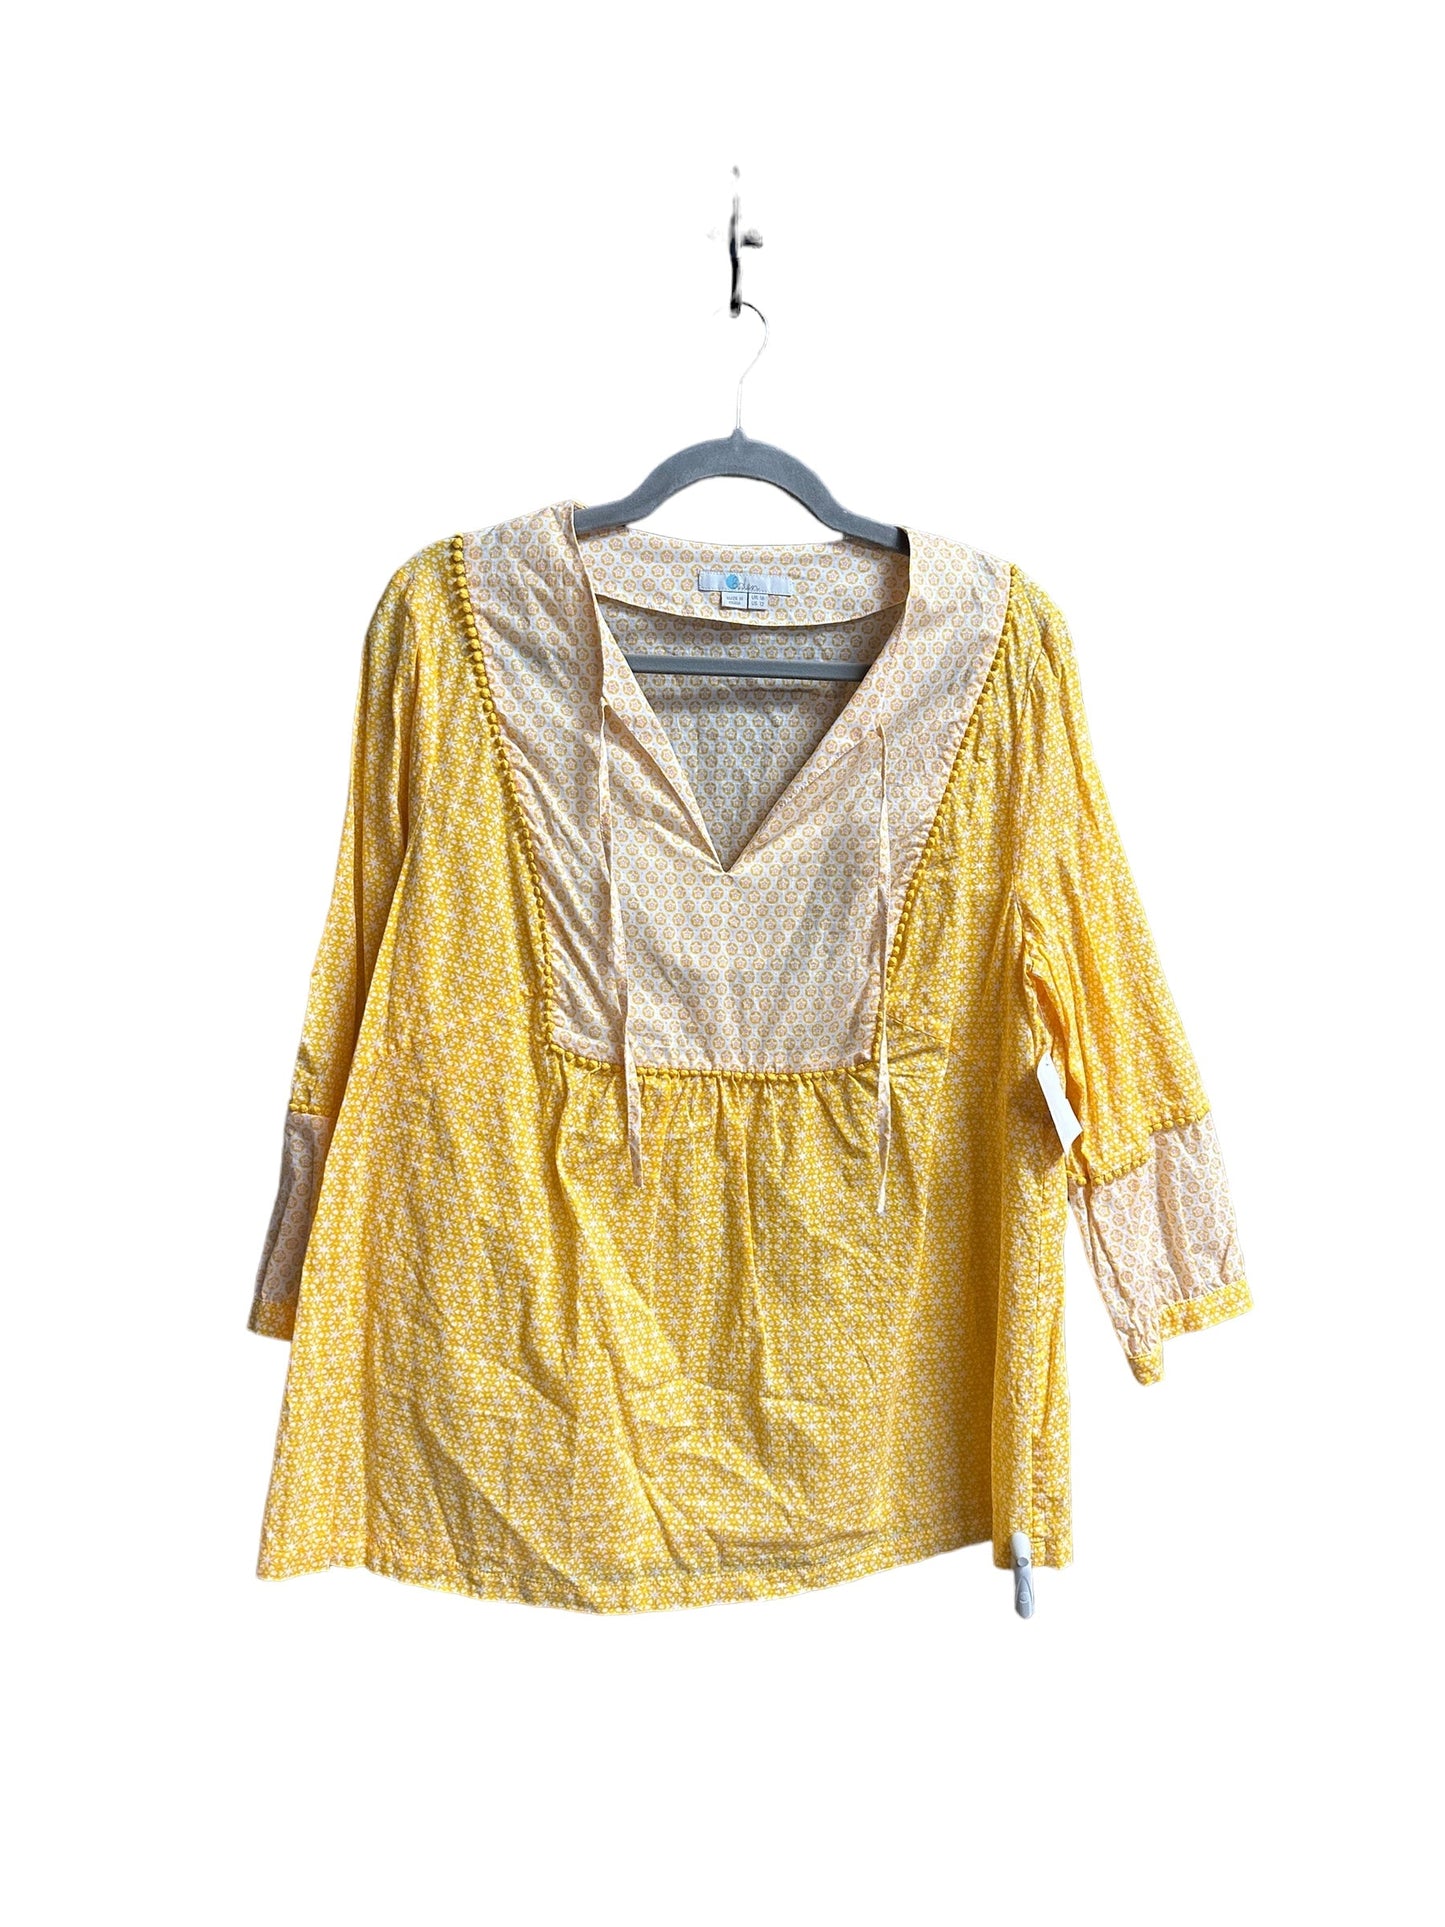 Yellow Top 3/4 Sleeve Boden, Size L